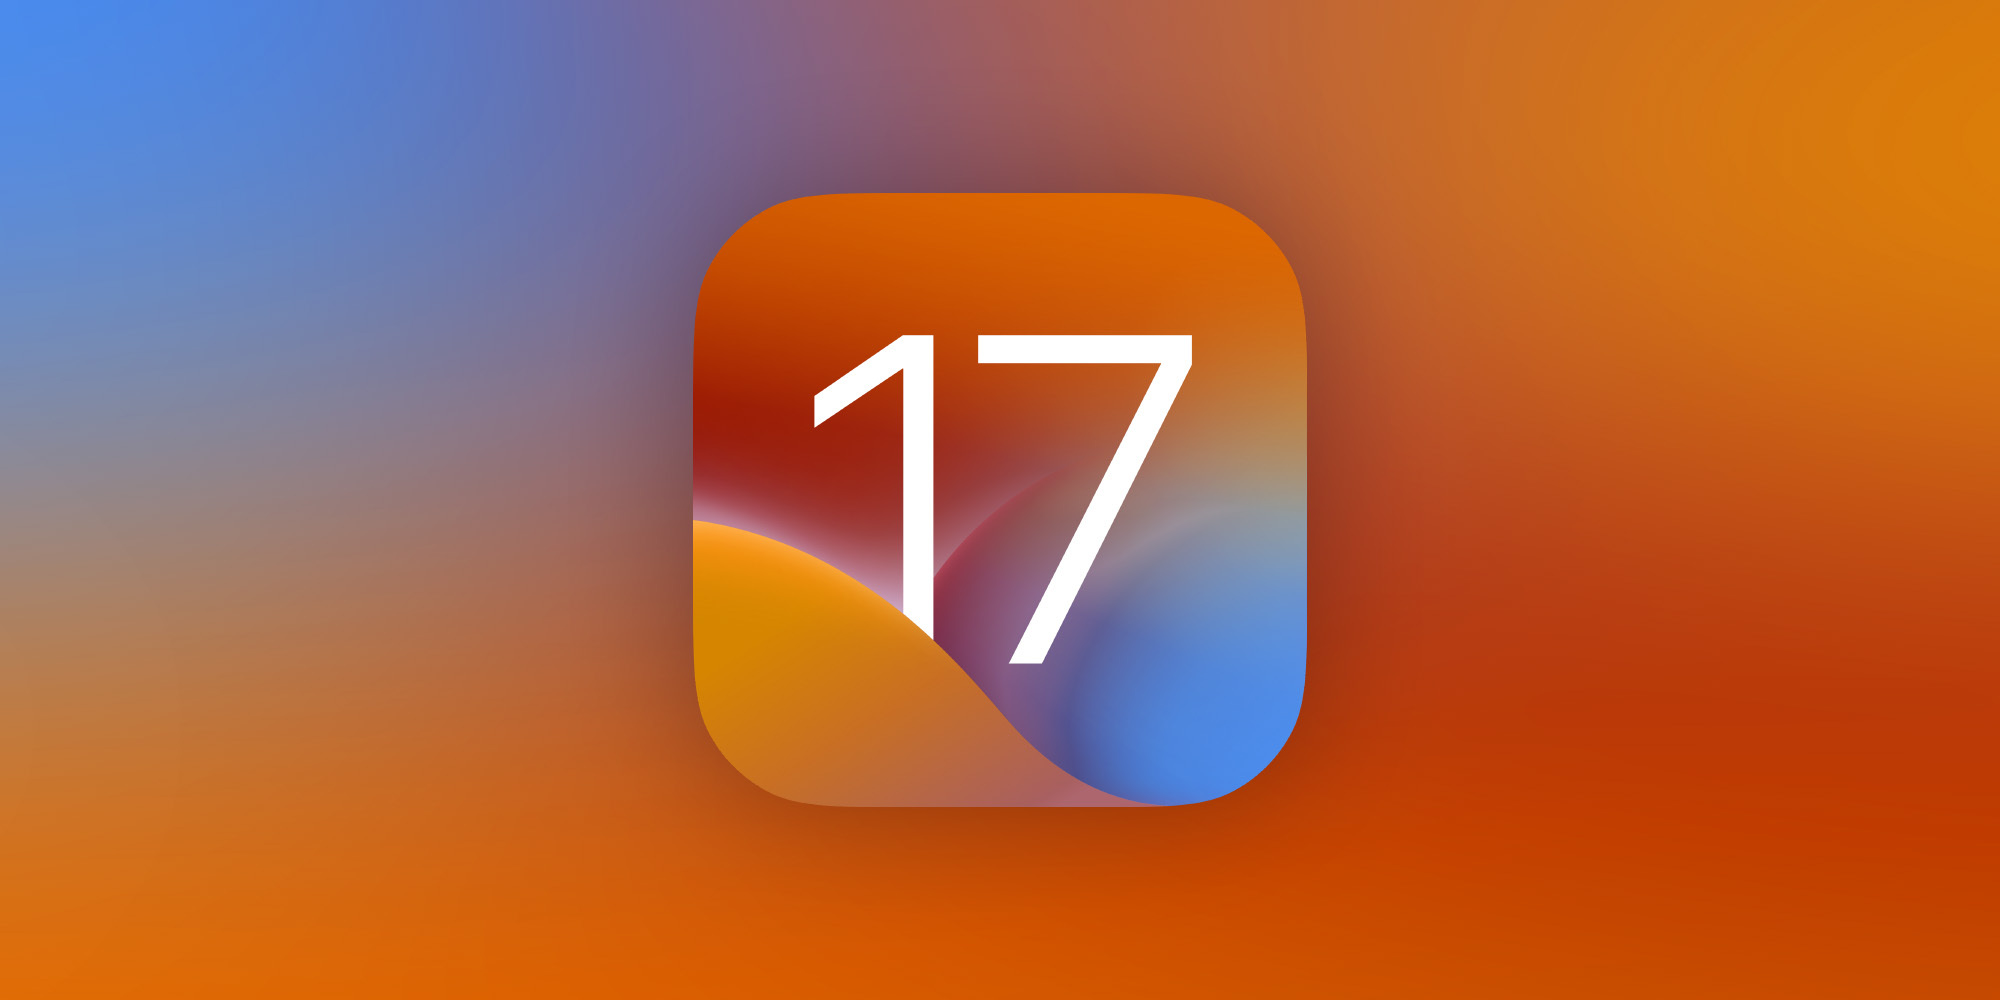 iOS 17: New features, release date, and more - 9to5Mac